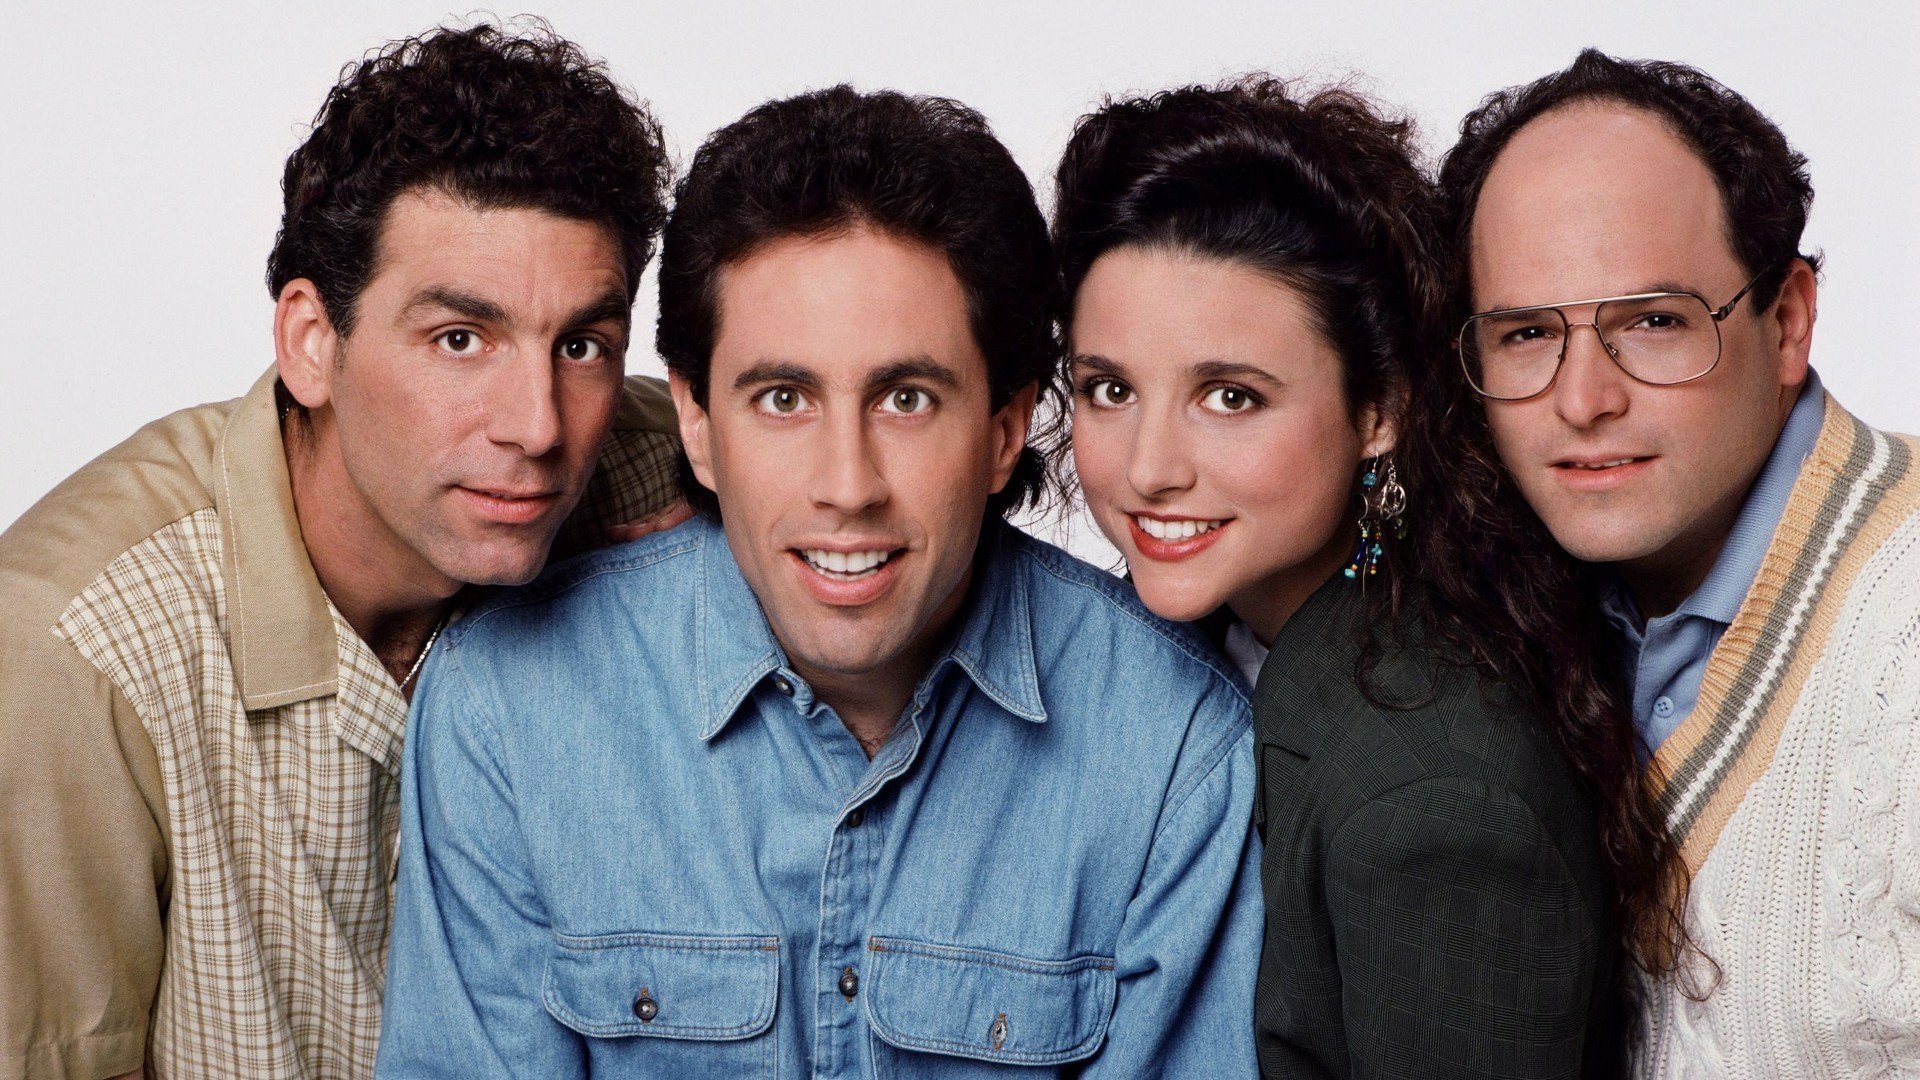 9 seinfeld hd wallpapers background images wallpaper abyss 9 seinfeld hd wallpapers background